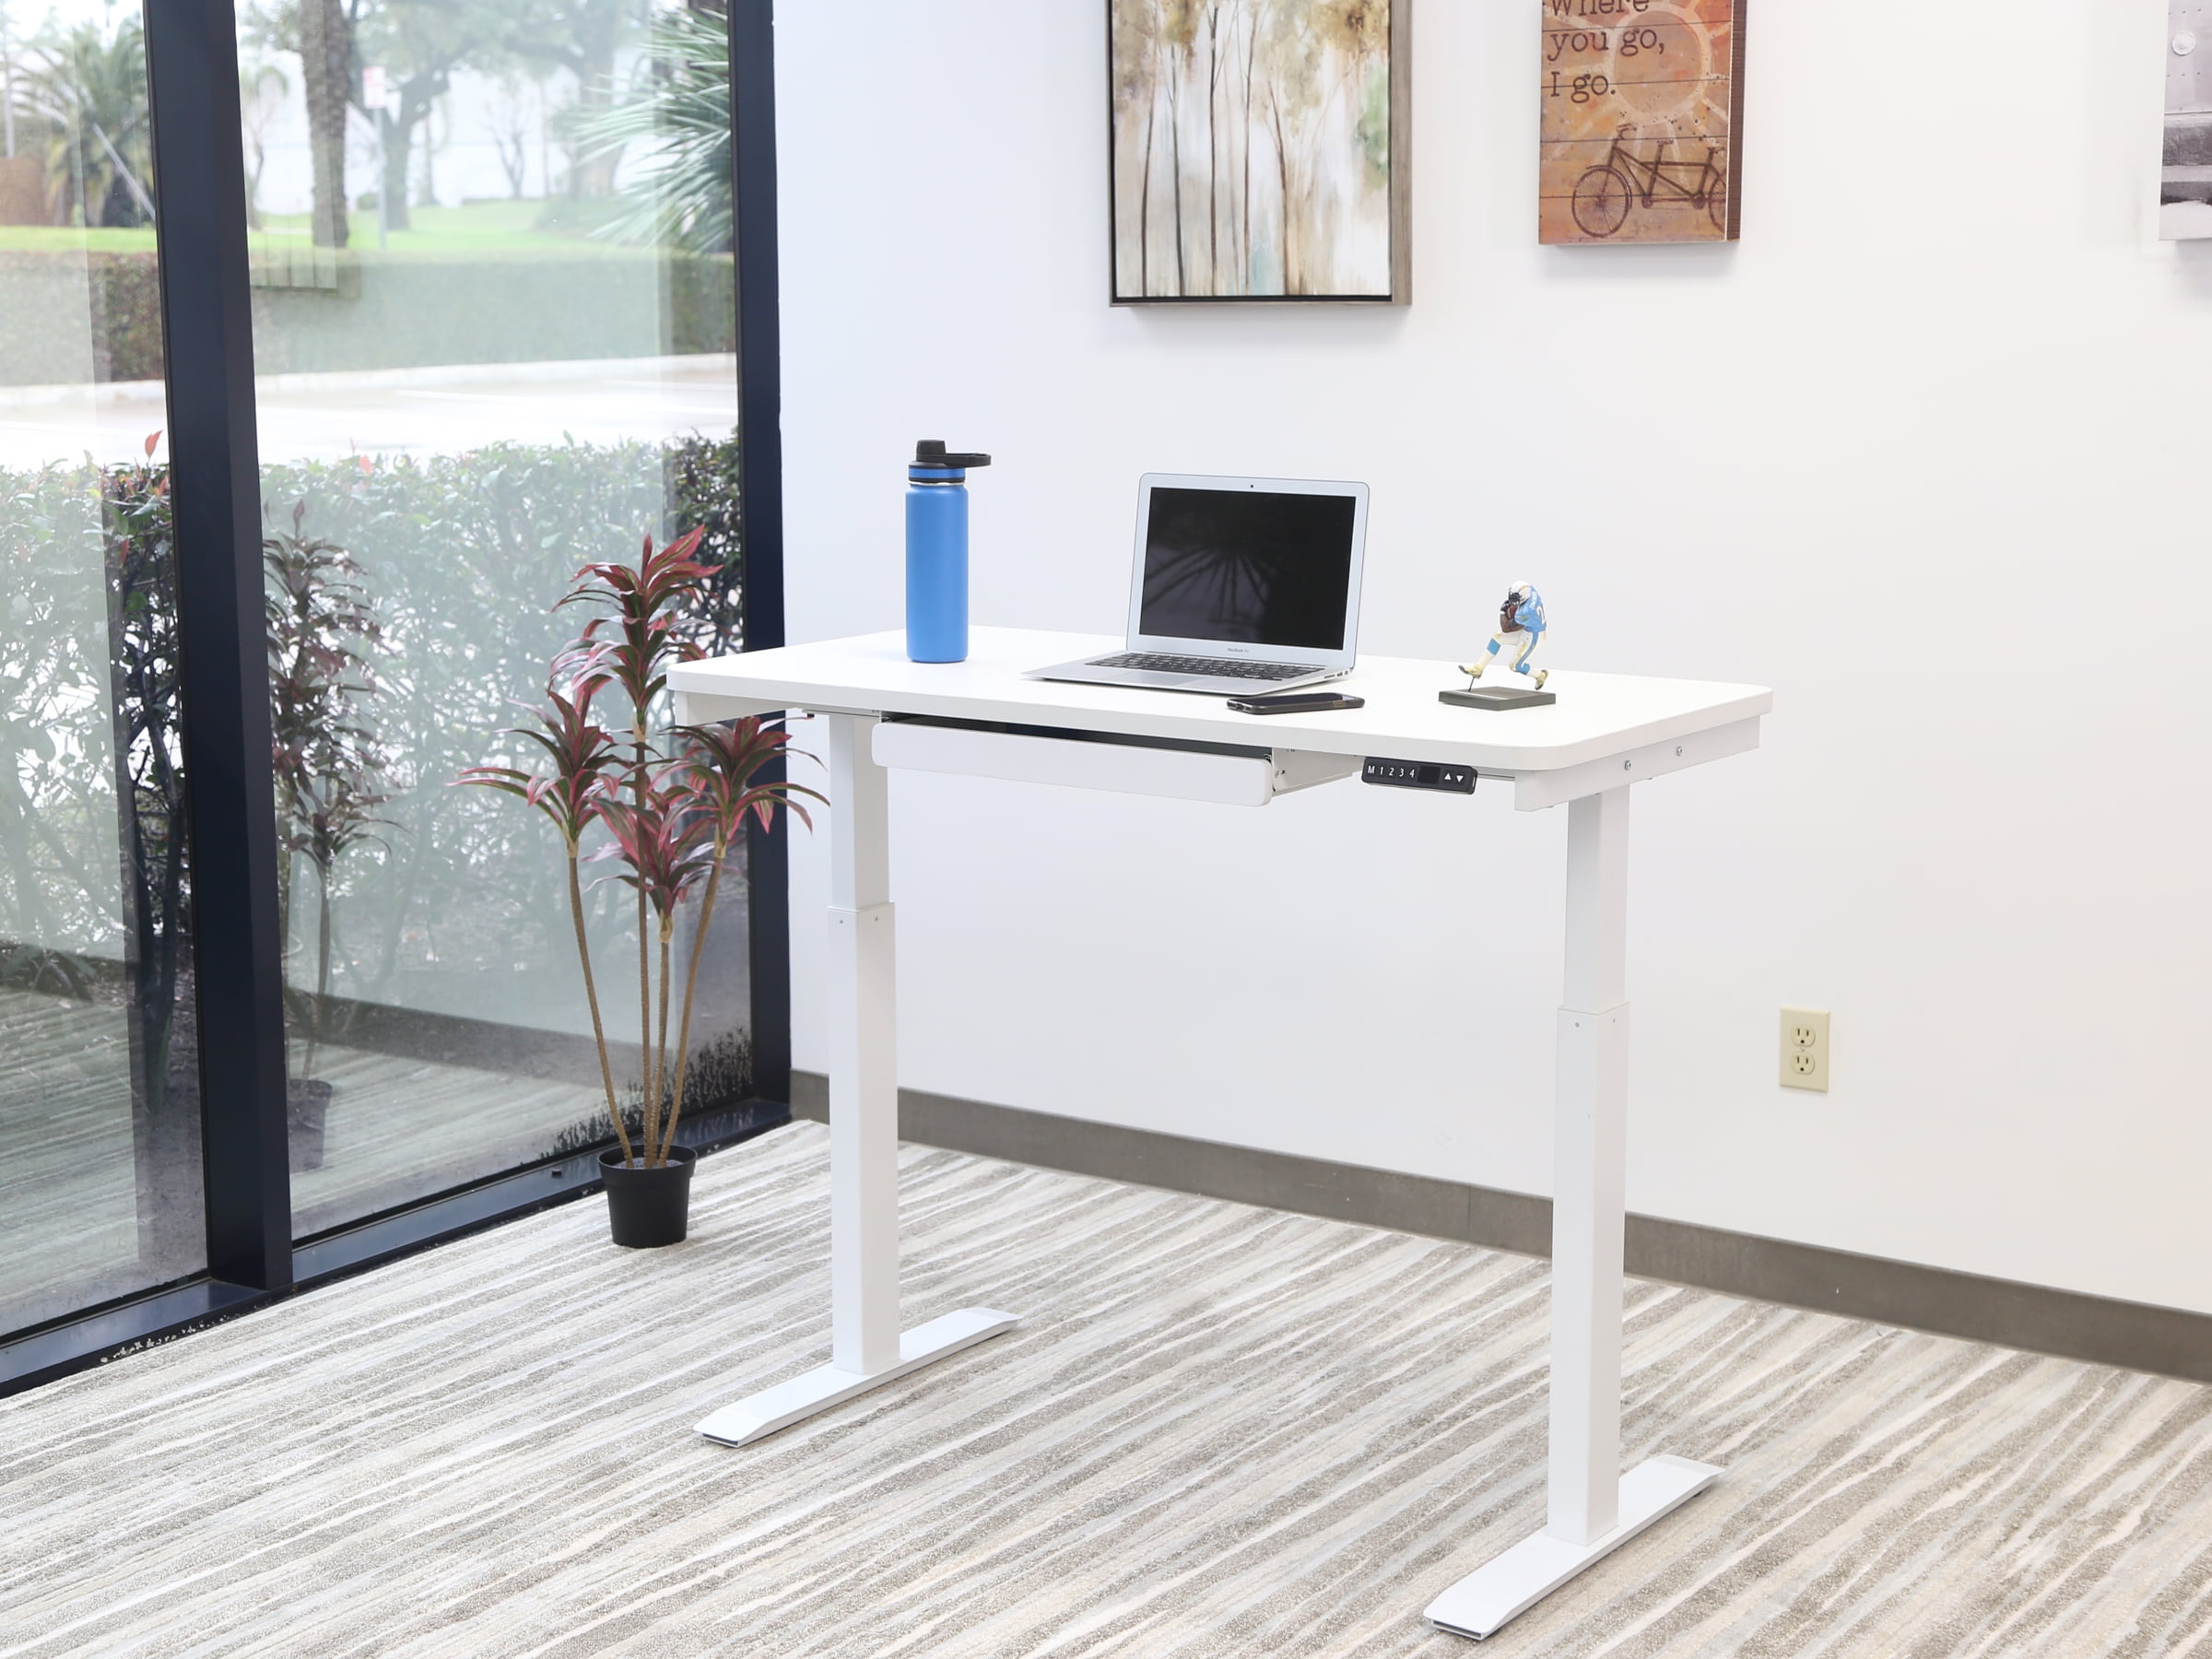 24”x48 Home Office Series 28-48 with Quickly Program up to 4 pre-Set Height adjustments and USB Charge Port Walnut Top with Black Motionwise SDG48A Electric Standing Desk 